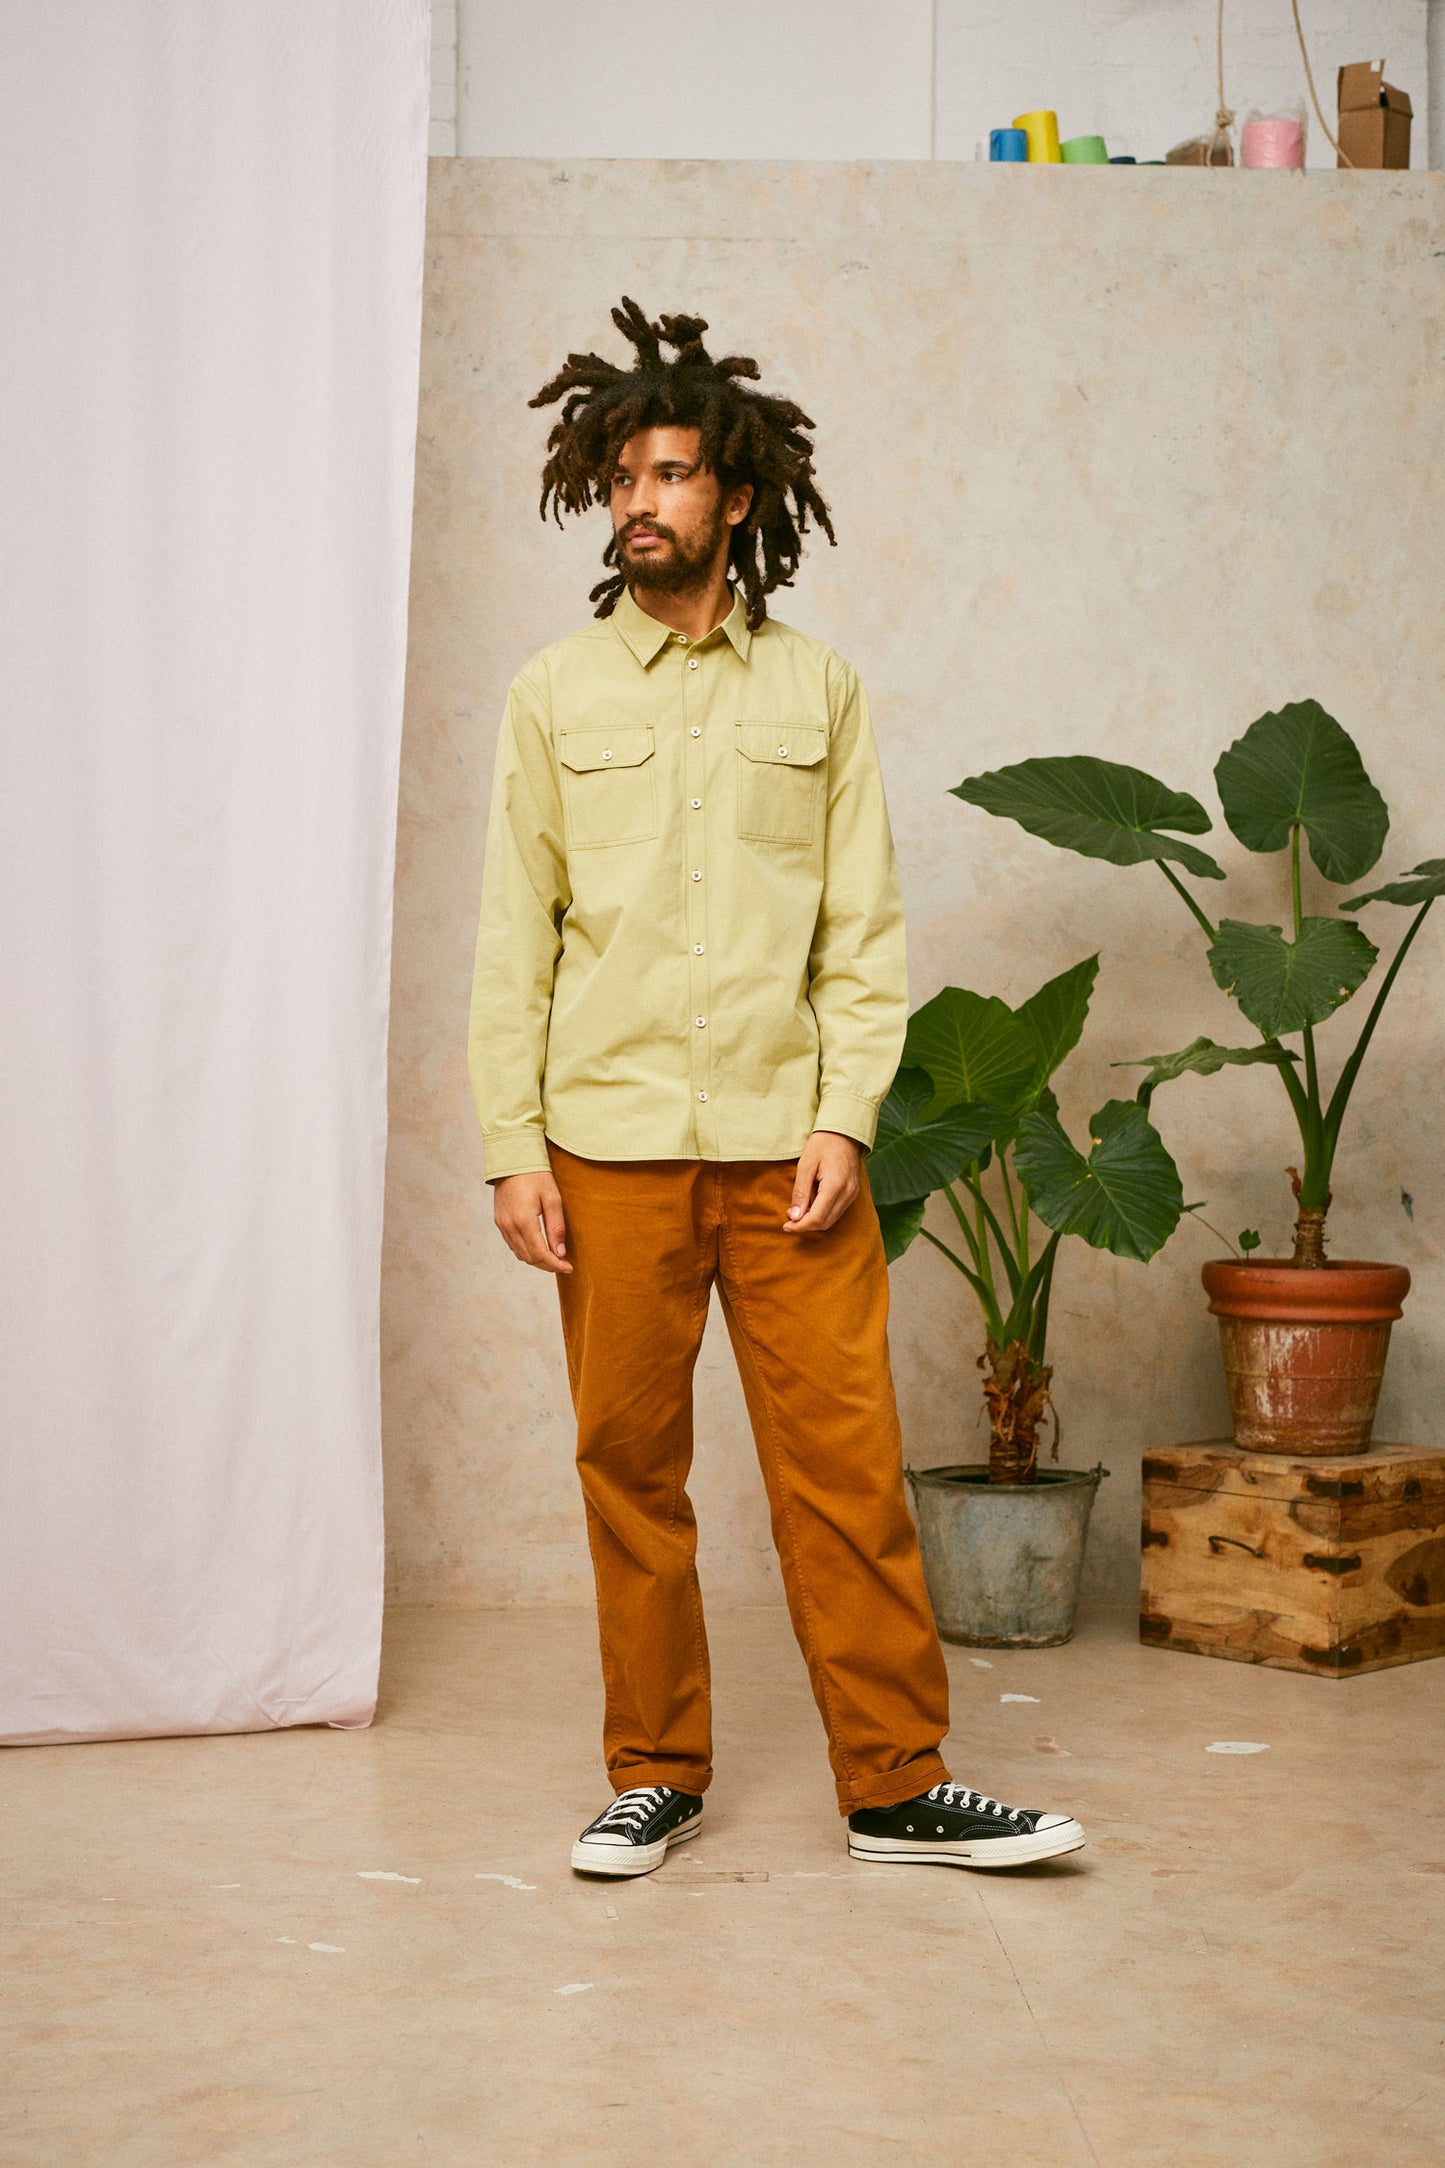 Full length shot of model wearing Saywood's Eddy Mens Khaki Shirt with utility pockets. Worn with tabacco trousers and black Converse. A plant and drop of pink fabric can be seen in the background.